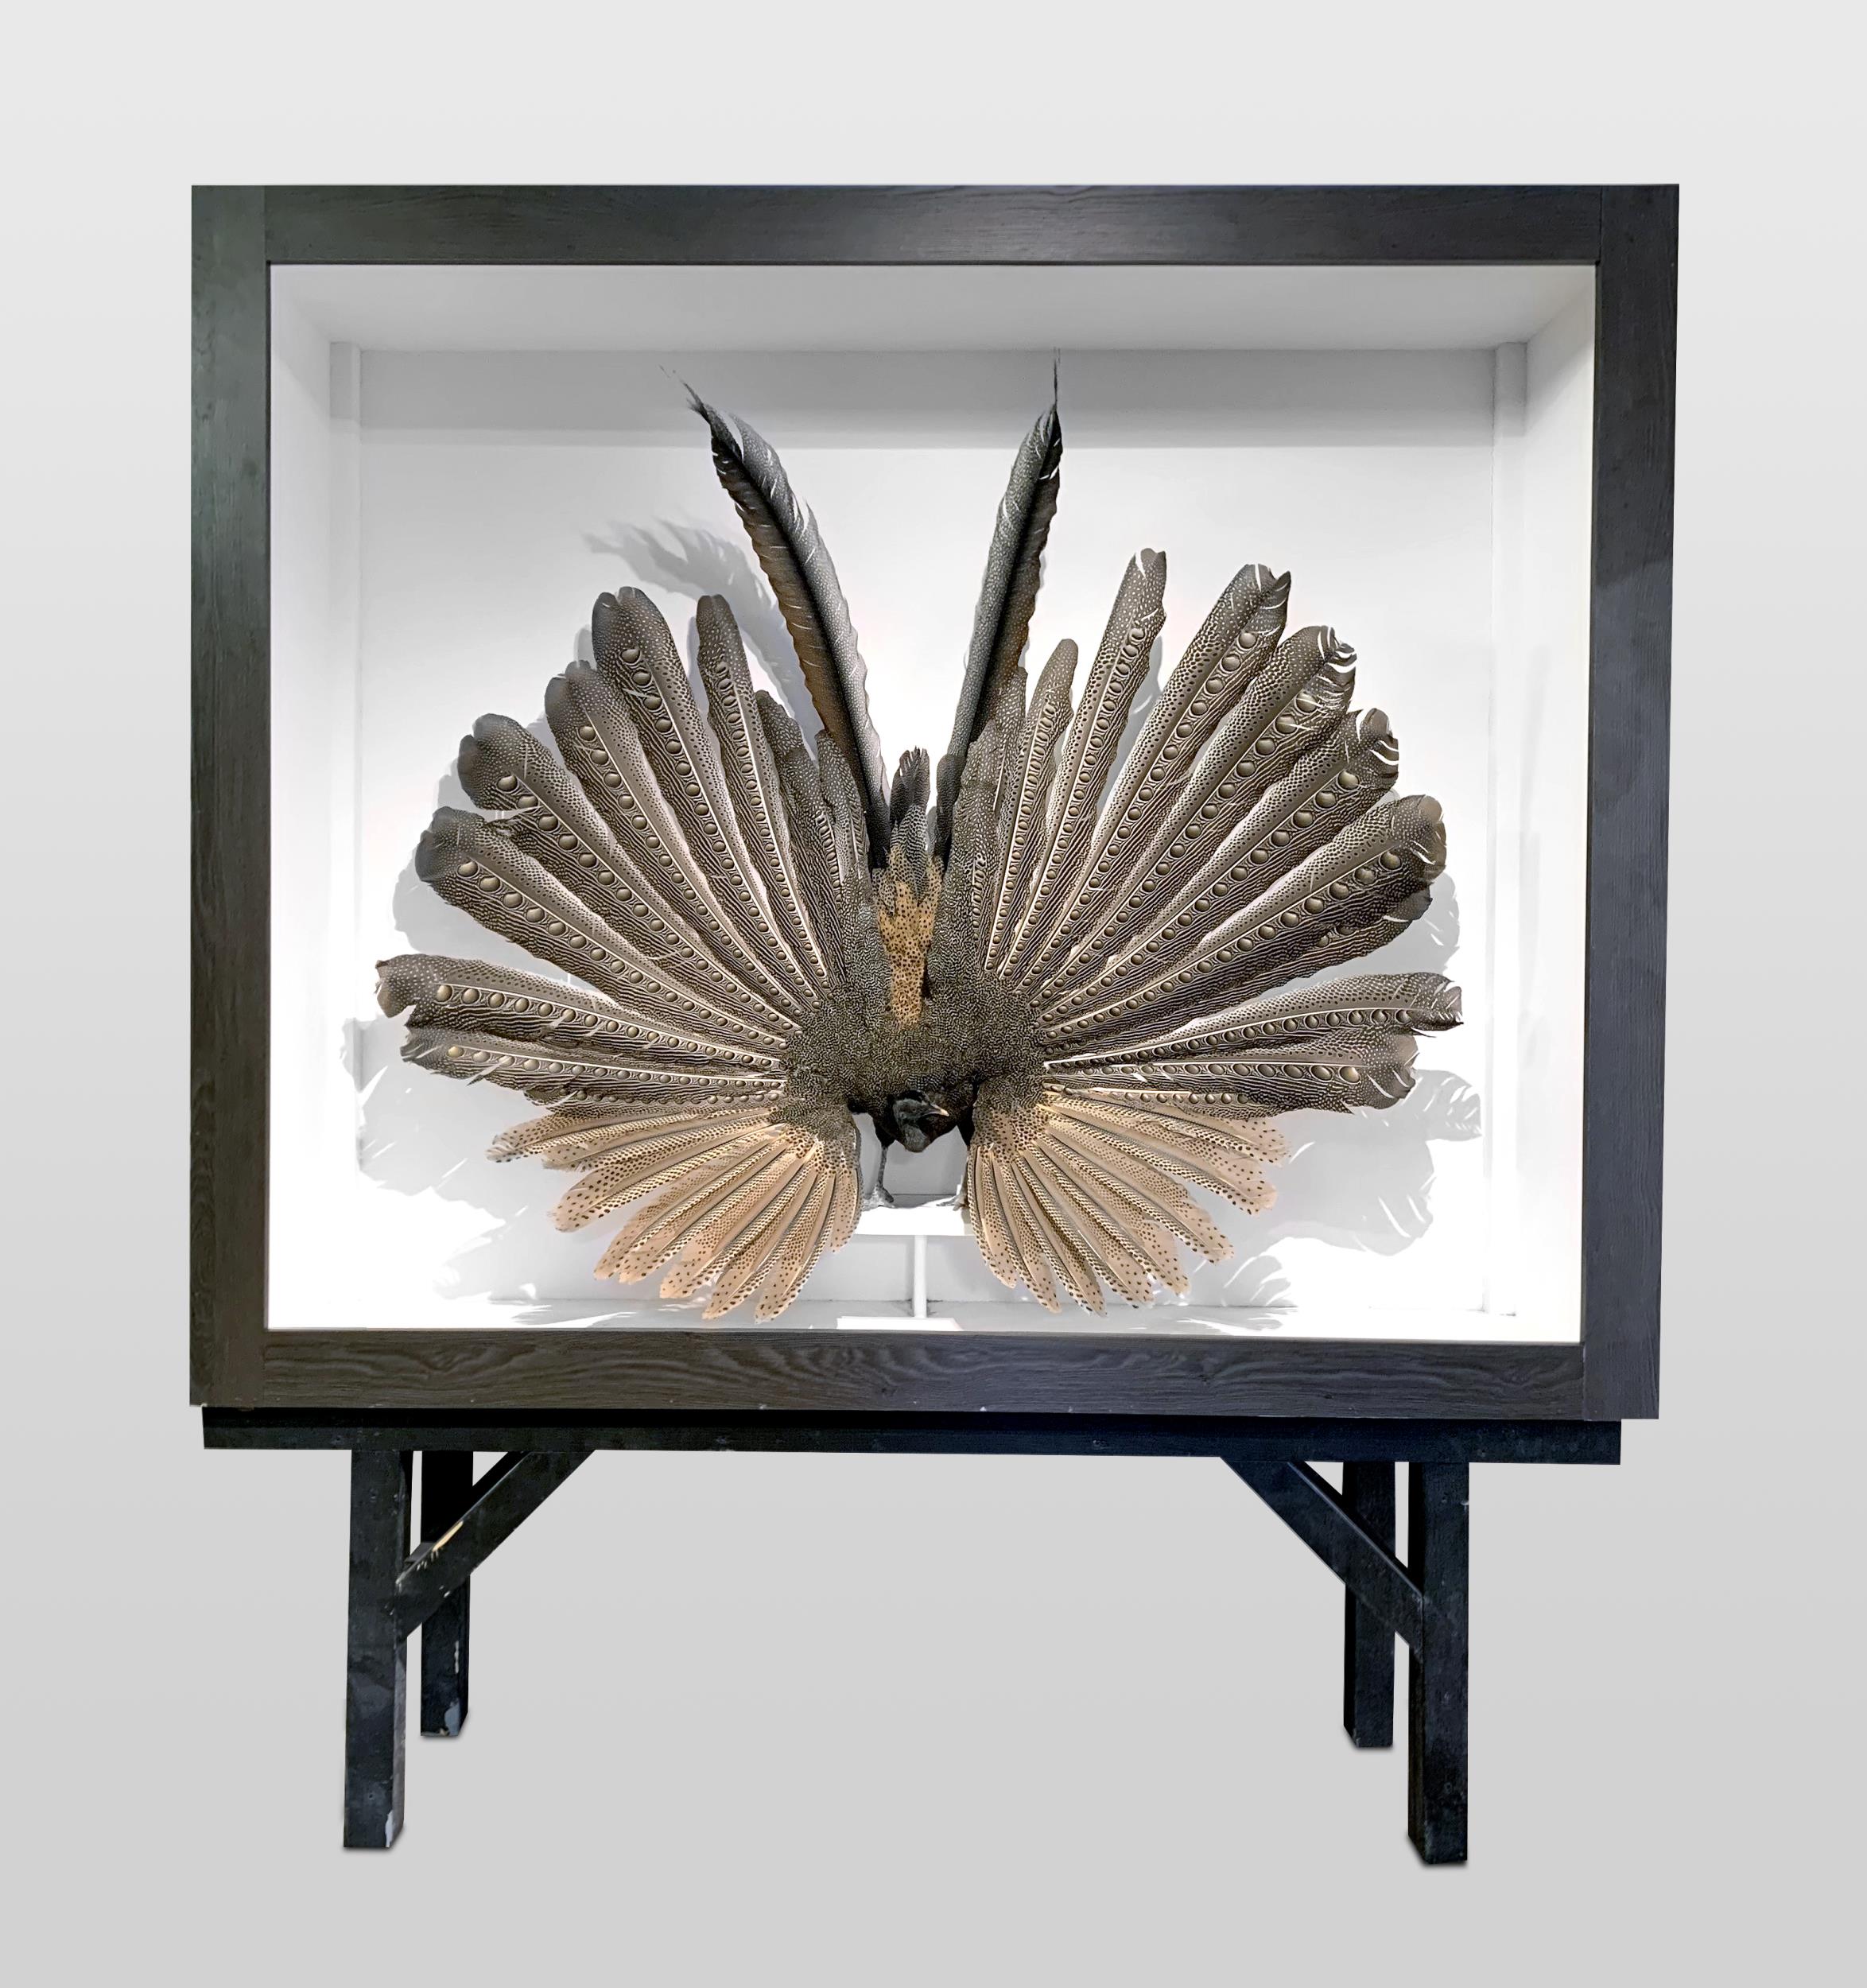 A MAGNIFICENT TAXIDERMY ARGUS PHEASANT MOUNTED IN A CUSTOM CASE (ARGUSIANUS ARGUS). Case without